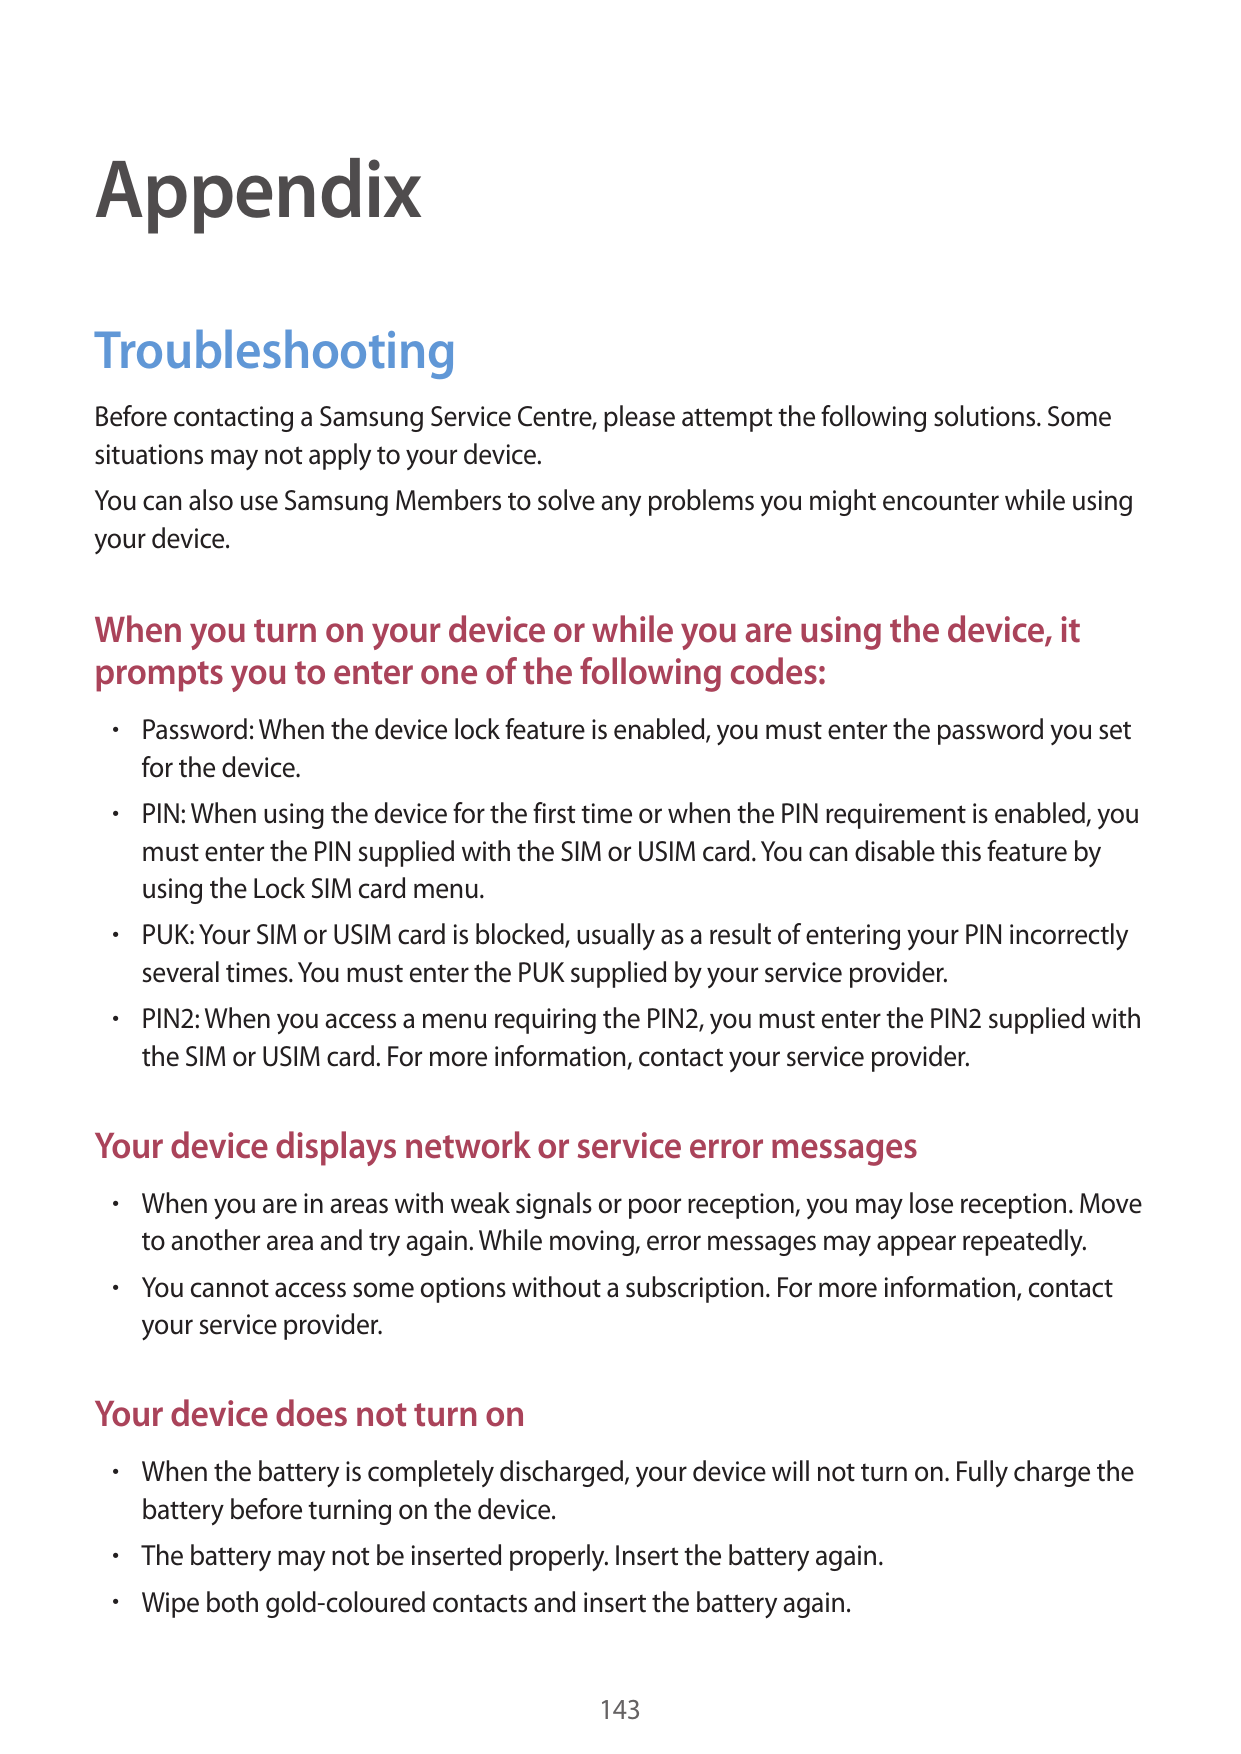 AppendixTroubleshootingBefore contacting a Samsung Service Centre, please attempt the following solutions. Somesituations may no